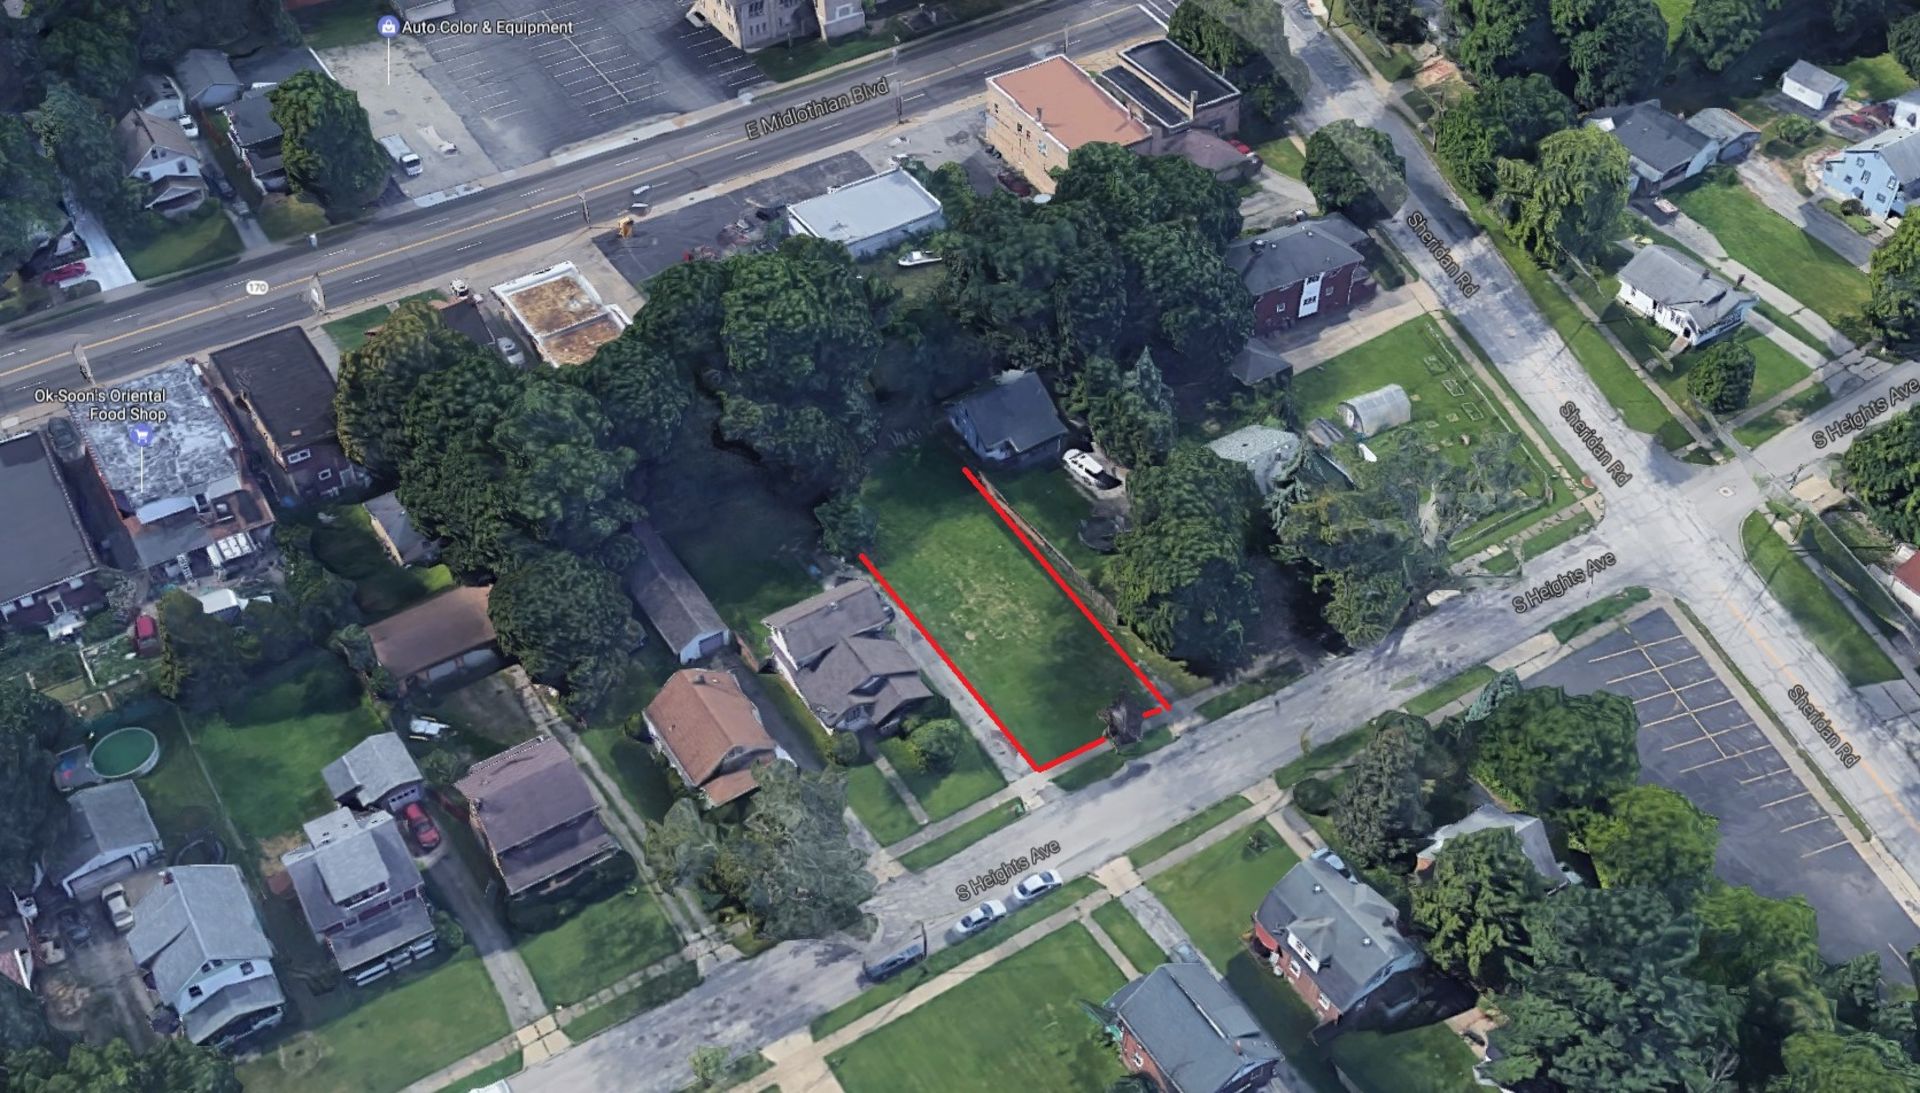 PLOT OF LAND AT 1921 S HEIGHTS AVENUE, YOUNGSTOWN, OHIO ADDRESS: 1921 S HEIGHTS AVENUE,